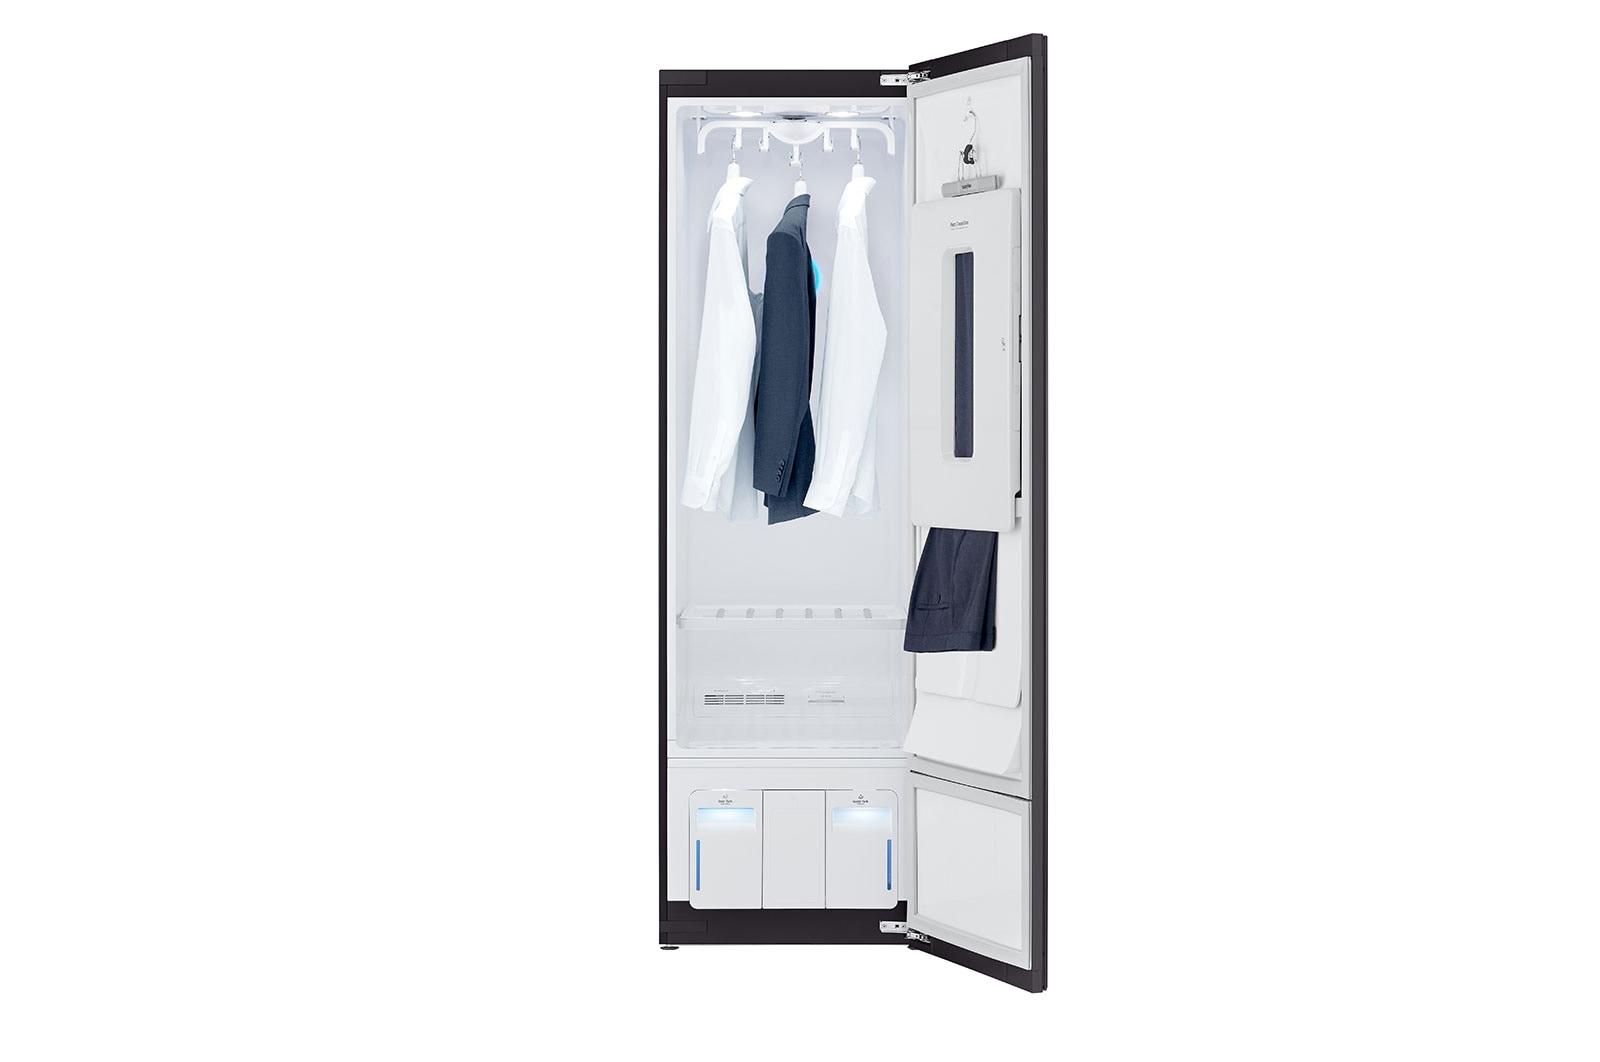 LG STUDIO Styler - Refresh Garments in Minutes with Smart wi-fi Enabled Steam Clothing Care System